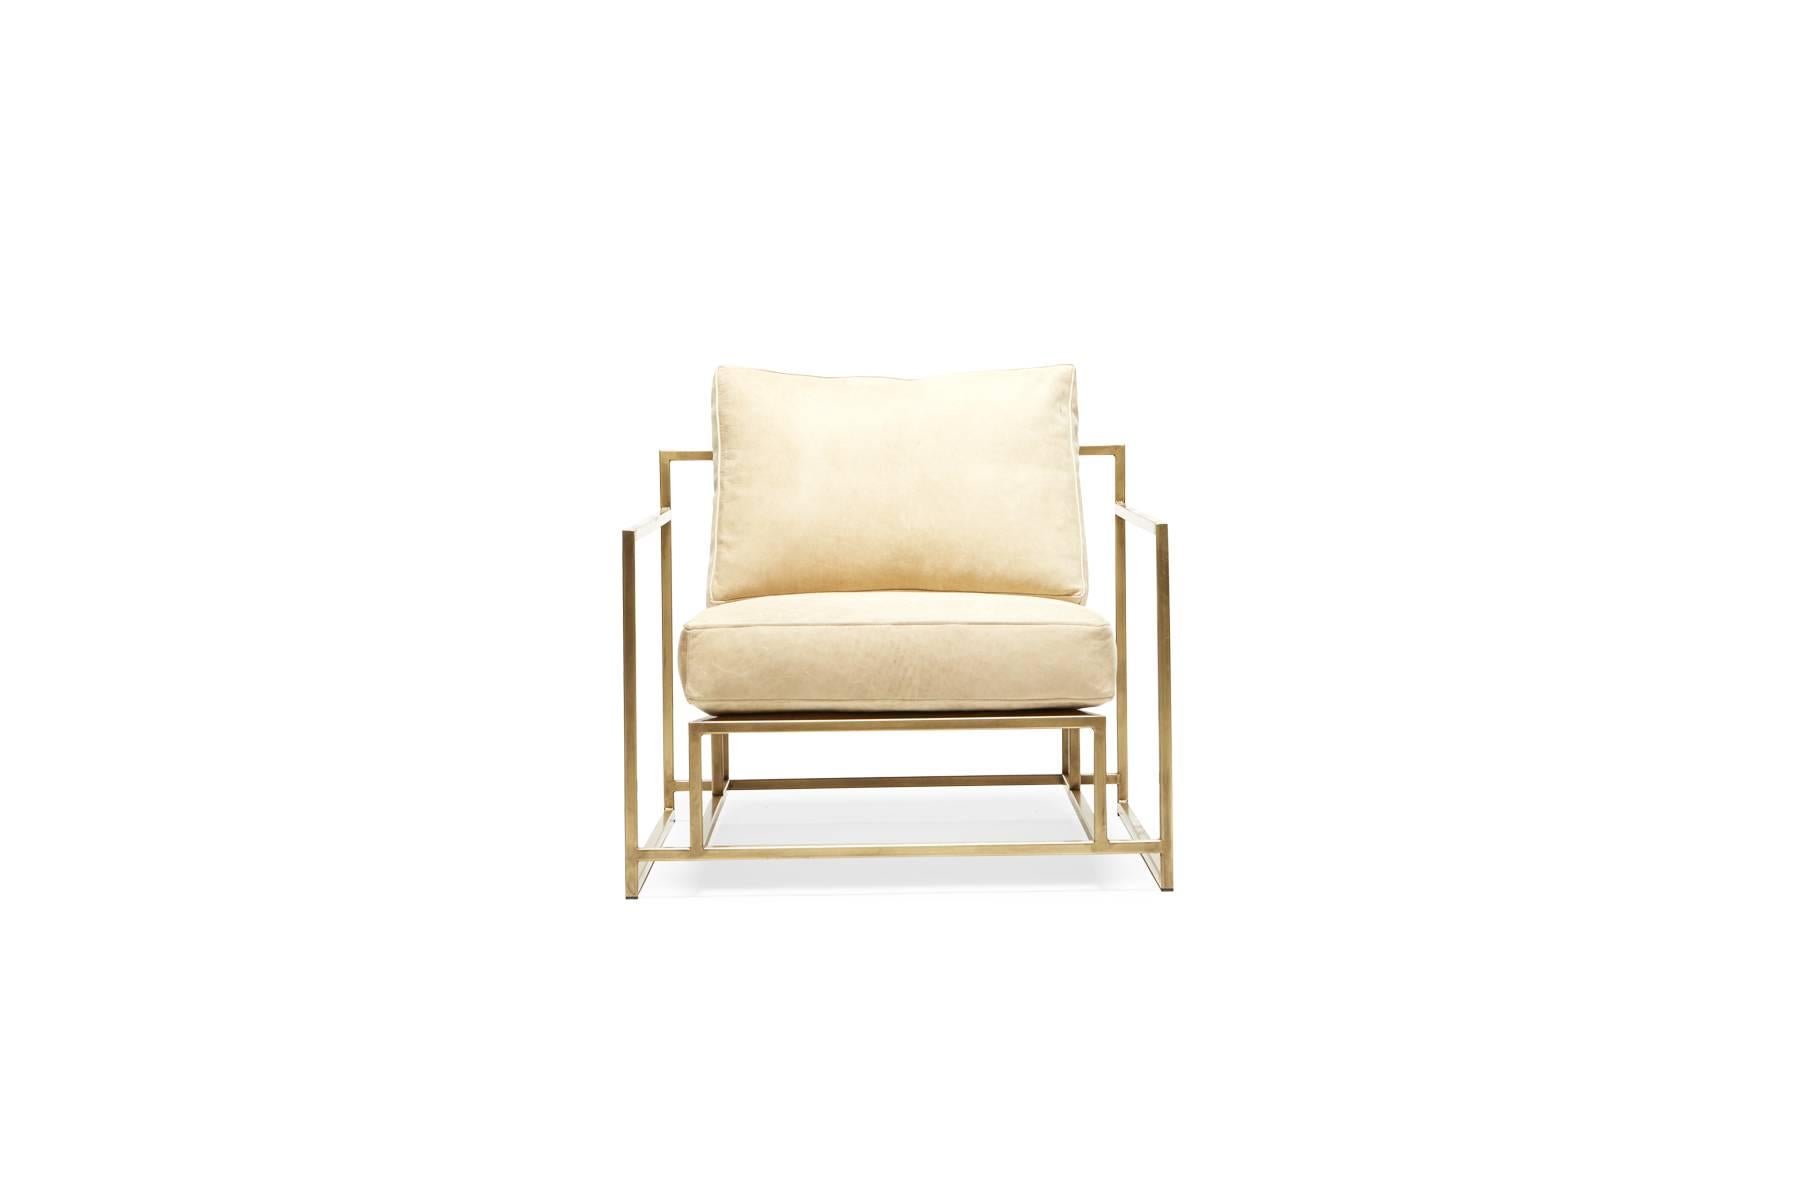 The Inheritance Armchair by Stephen Kenn is as comfortable as it is unique. The design features an exposed construction composed of three elements - a steel frame, plush upholstery, and supportive belts. The deep seating area is perfect for a